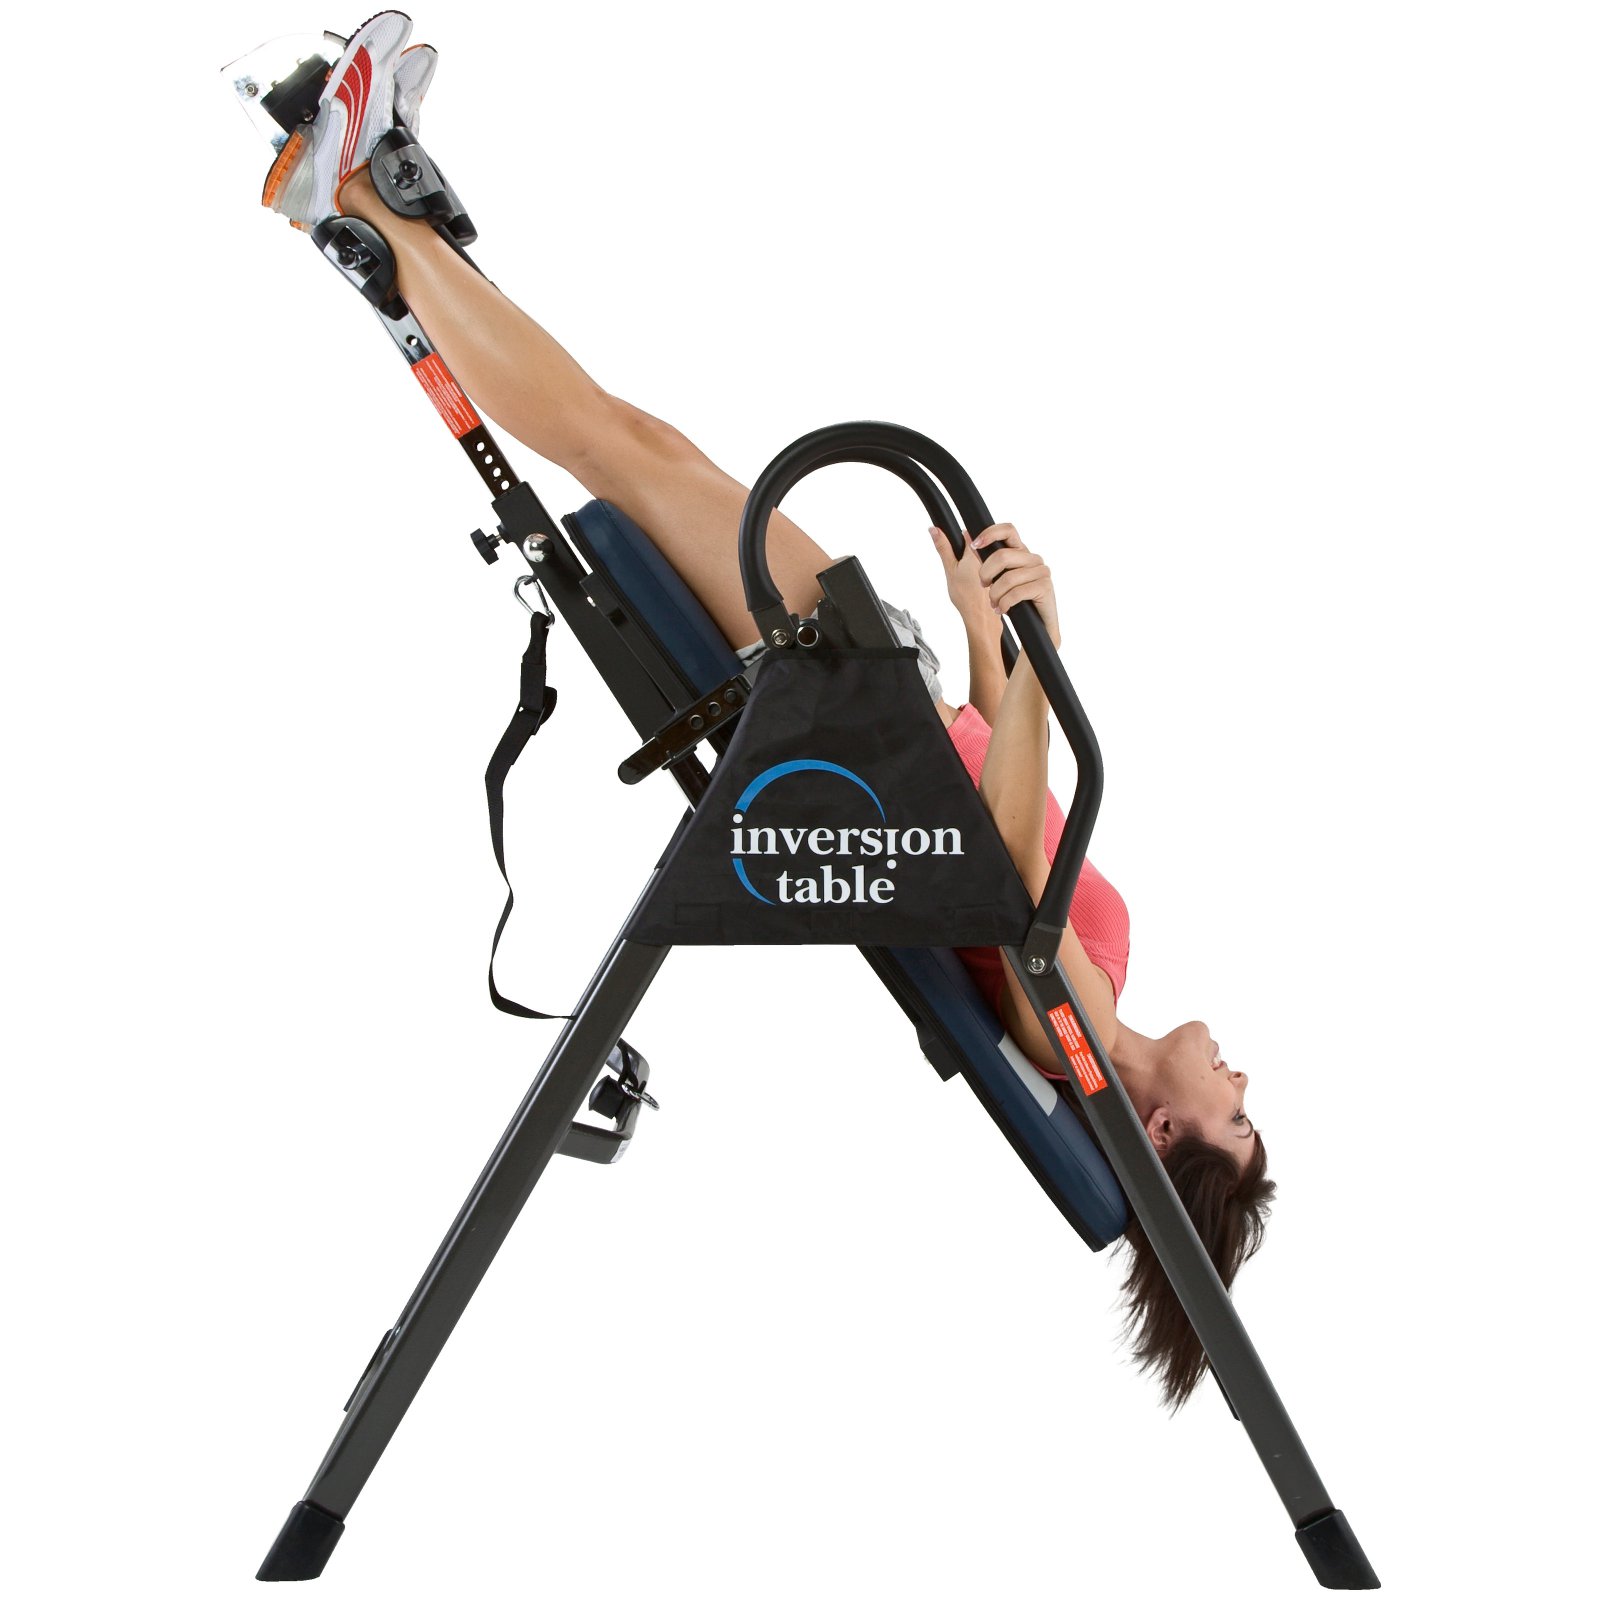 Ironman Fitness Gravity 4000 Highest Weight Capacity Inversion Table - image 5 of 6